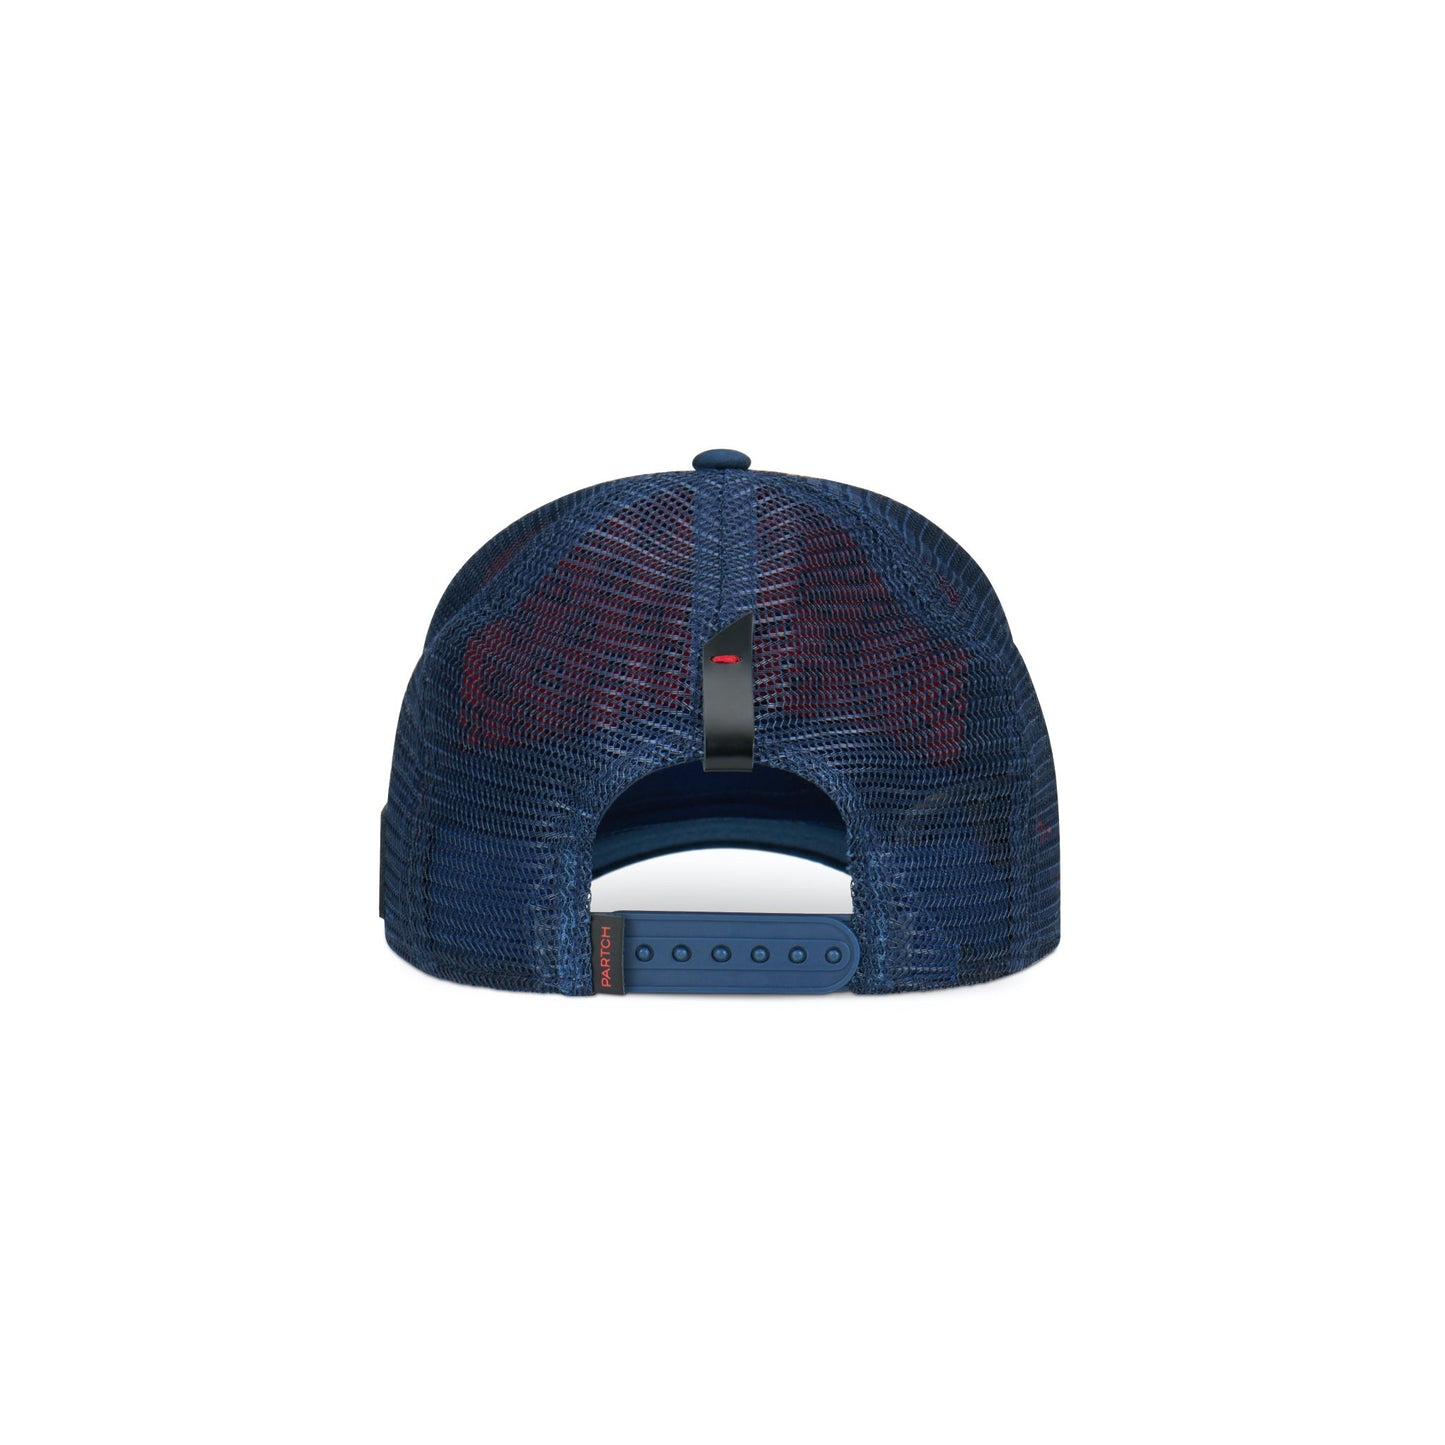 Partch Trucker Hat Navy with PARTCH-Clip Inspyr Back View